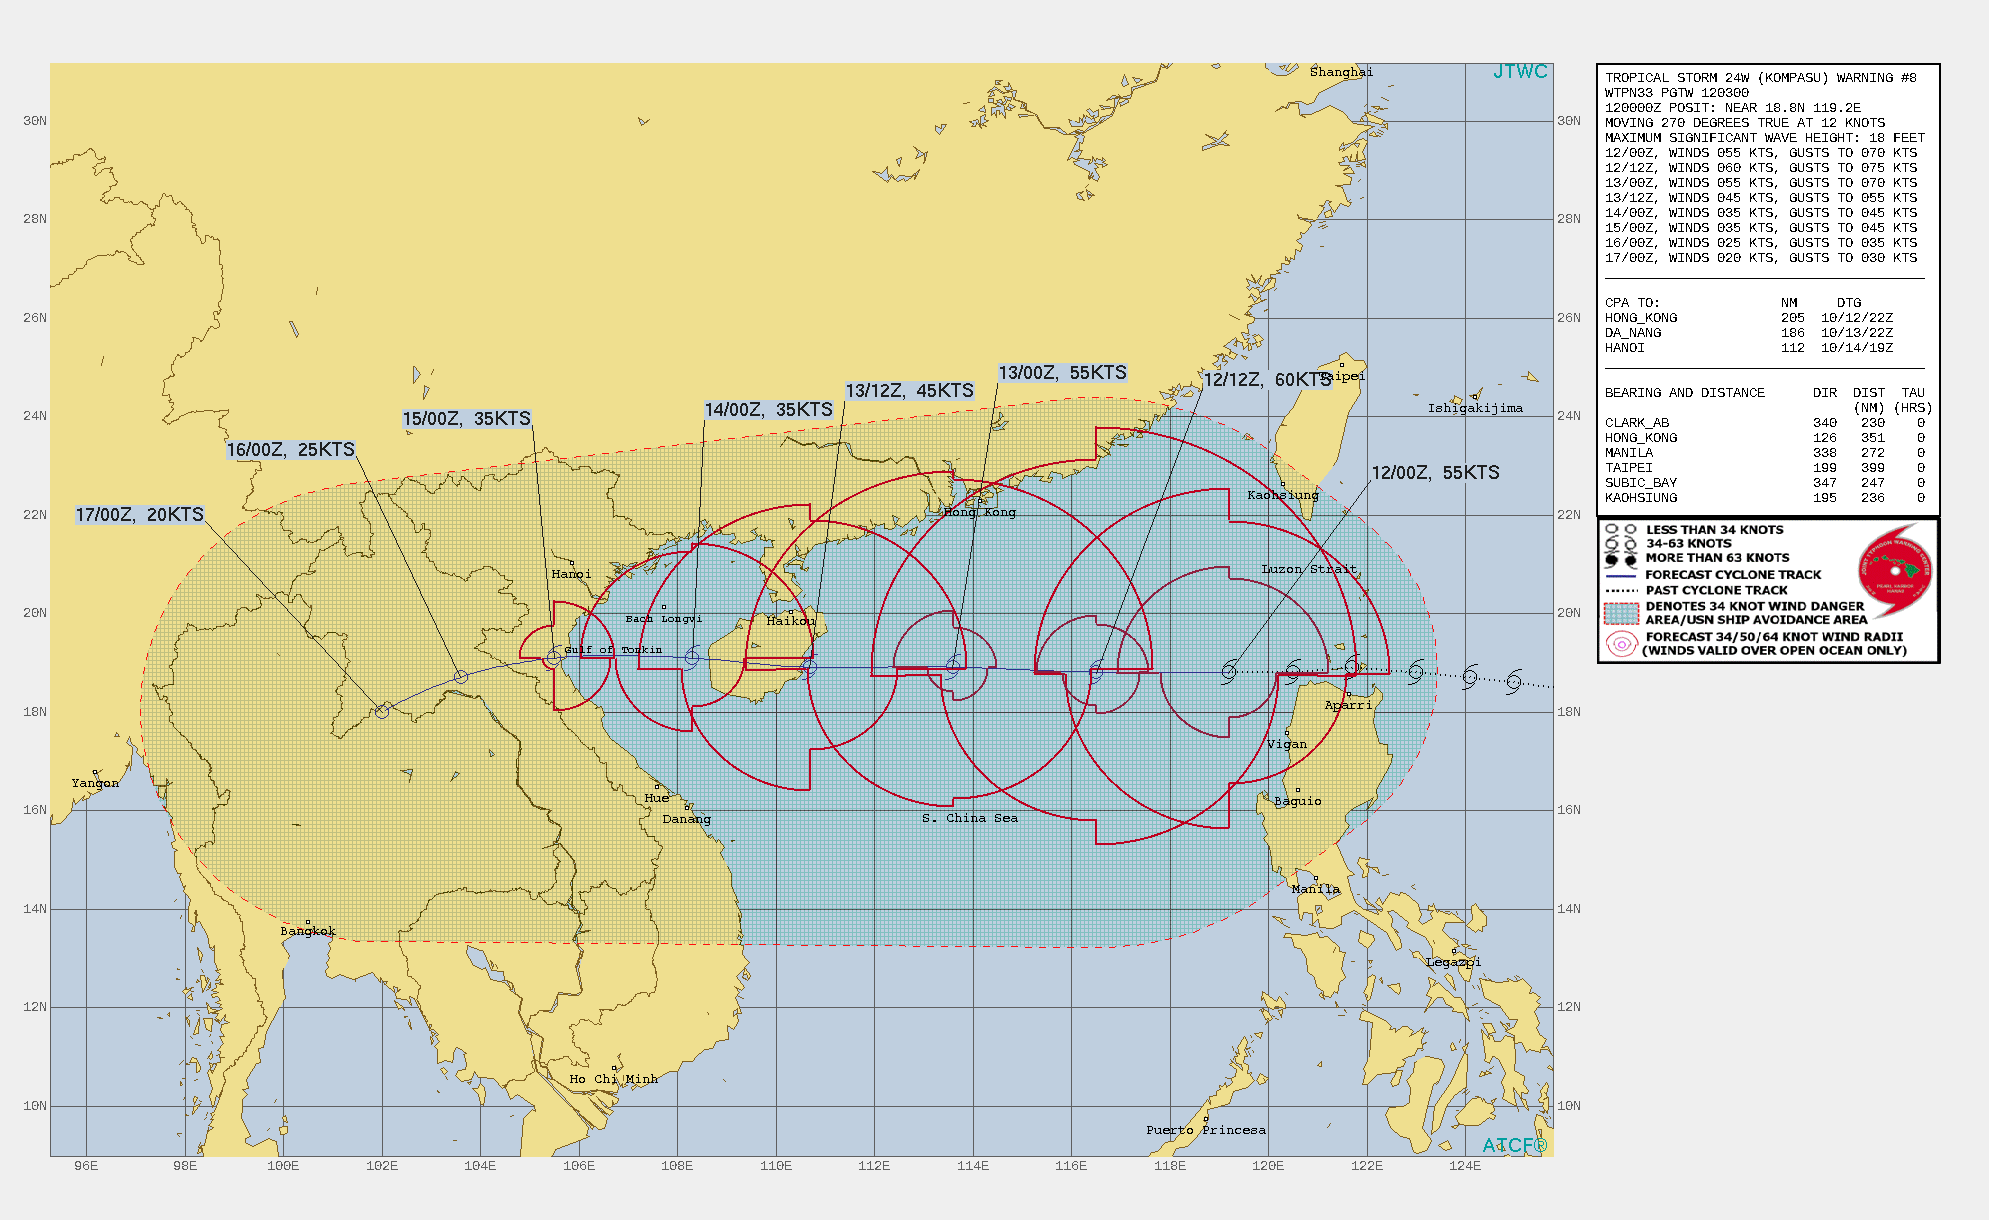 FORECAST REASONING.  SIGNIFICANT FORECAST CHANGES: THERE ARE NO SIGNIFICANT CHANGES TO THE FORECAST FROM THE PREVIOUS WARNING.  FORECAST DISCUSSION: TROPICAL STORM KOMPASU IS FORECAST TO CONTINUE TRACKING NEARLY DUE WEST THROUGH THE FORECAST PERIOD, ALONG THE SOUTHERN PERIPHERY OF THE DEEP SUBTROPICAL RIDGE(STR) LYING OVER CENTRAL CHINA. THE SYSTEM IS EXPECTED TO MAKE ITS FIRST LANDFALL ALONG THE COAST OF CENTRAL HAINAN ISLAND NEAR 36H, EMERGE INTO THE GULF OF TONKIN BY 48H, THEN MAKE A SECOND LANDFALL ALONG THE COAST OF NORTH VIETNAM NEAR 72H. THE GENERAL ENVIRONMENT IS EXPECTED TO REMAIN MARGINALLY FAVORABLE FOR ANOTHER 12 TO 18 HOURS, WITH SHEAR VALUES REMAINING AT OR BELOW CURRENT LEVELS. IN RESPONSE, TS 24W IS FORECAST TO INTENSIFY TO 60 KNOTS BY 12H. AFTER 12H, THE SYSTEM WILL WEAKEN STEADILY UNDER INCREASING VWS. AFTER CROSSING HAINAN, THE SYSTEM IS EXPECTED TO EMERGE INTO THE GULF OF TONKIN AS A WEAK TROPICAL STORM, AND THE COMBINATION OF WEAK OUTFLOW AND MODERATE LEVELS OF VWS WILL PRECLUDE ADDITIONAL INTENSIFICATION BEFORE THE SECOND LANDFALL. ONCE ASHORE, FRICTIONAL EFFECTS WITH THE RUGGED TERRAIN OF VIETNAM WILL RAPIDLY ERODE THE CIRCULATION, LEADING TO DISSIPATION OVER NORTHERN LAOS NO LATER THAN 120H.